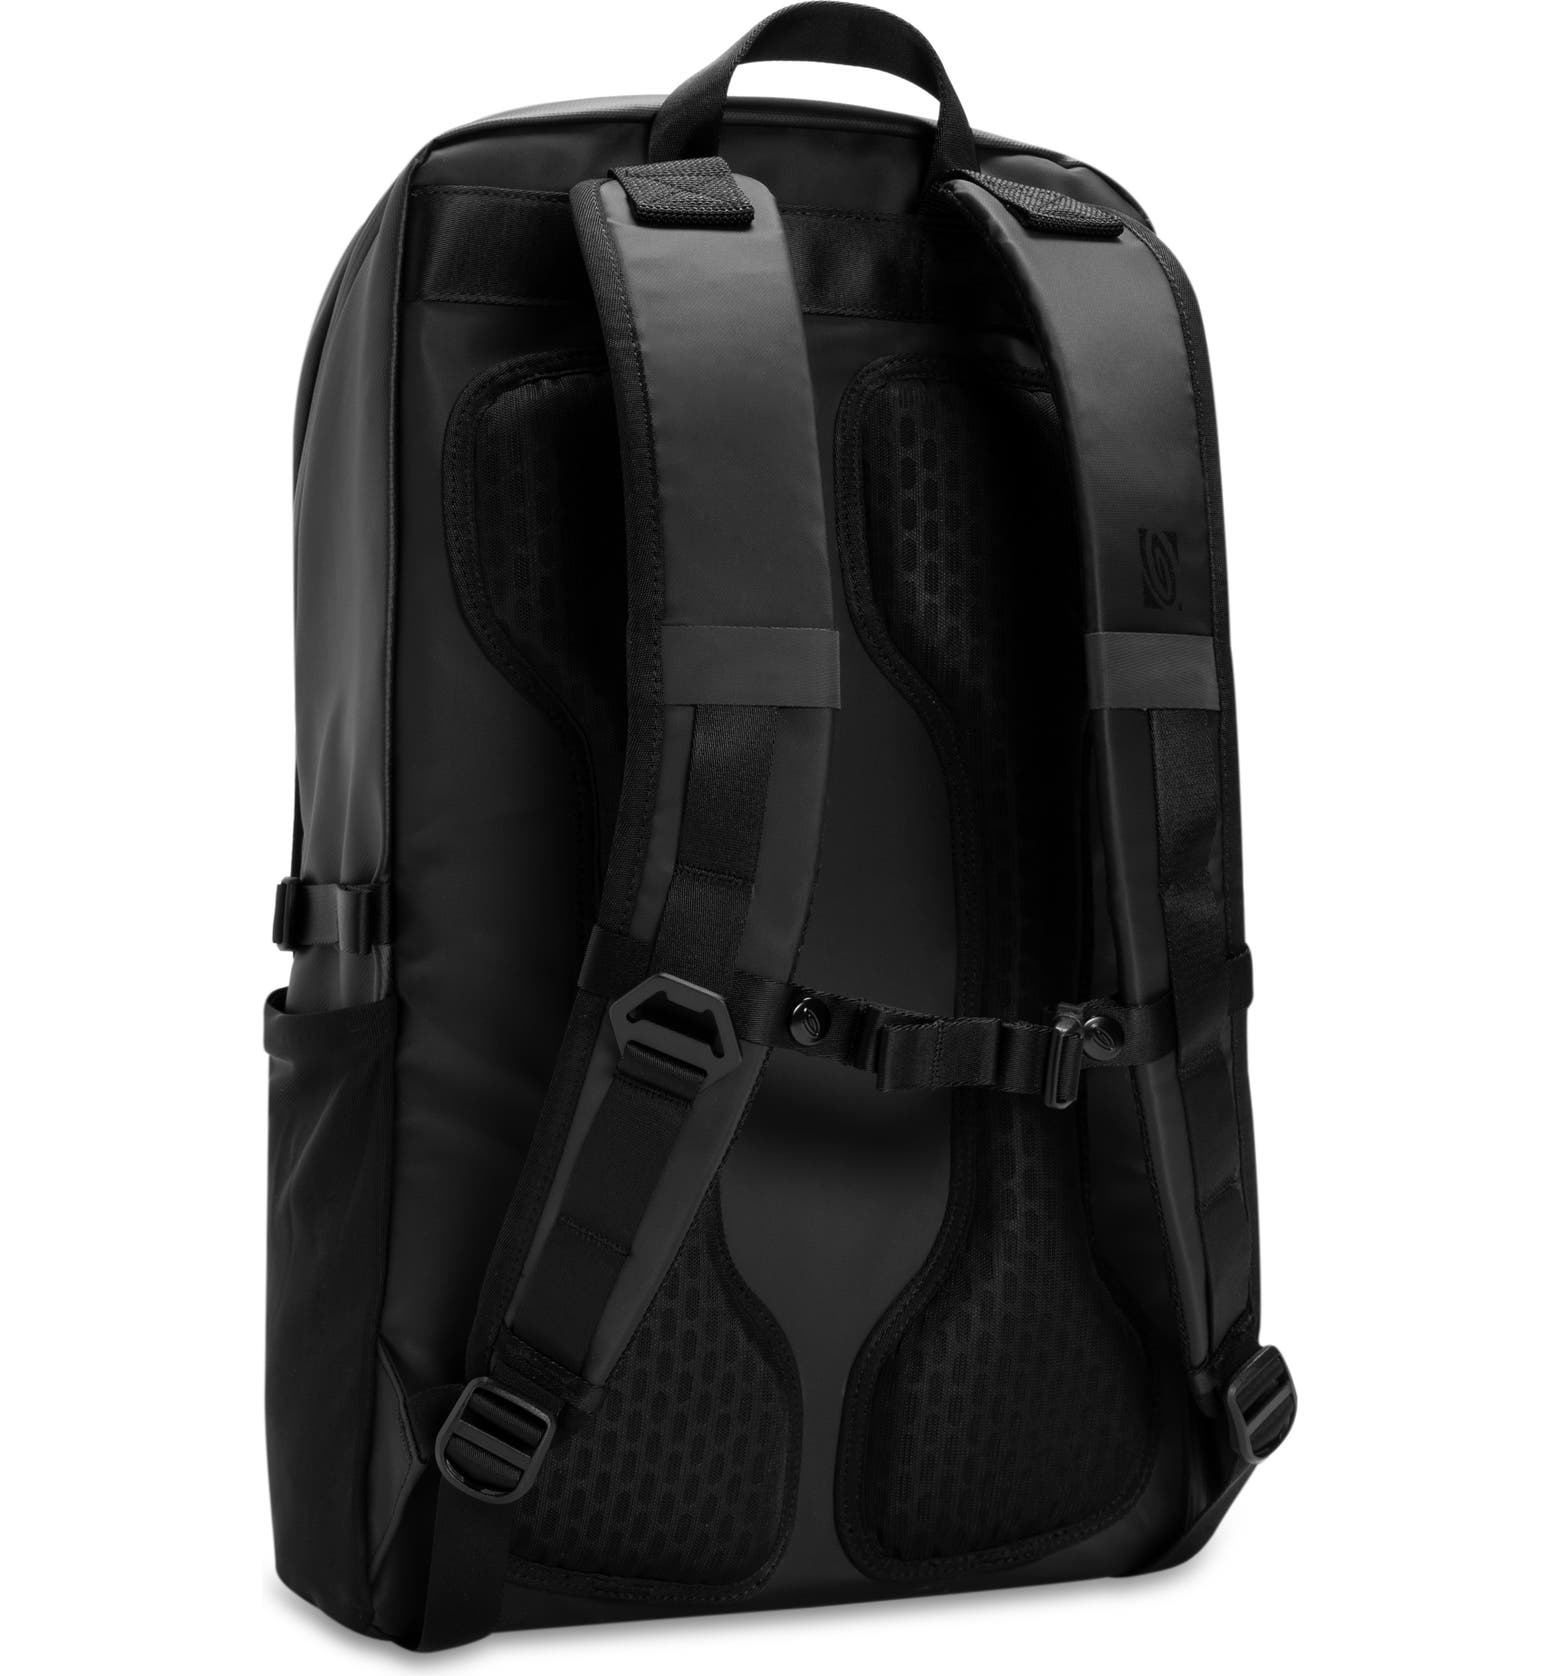 Timbuk2 Especial Scope Expandable Black Backpack | Nordstrom